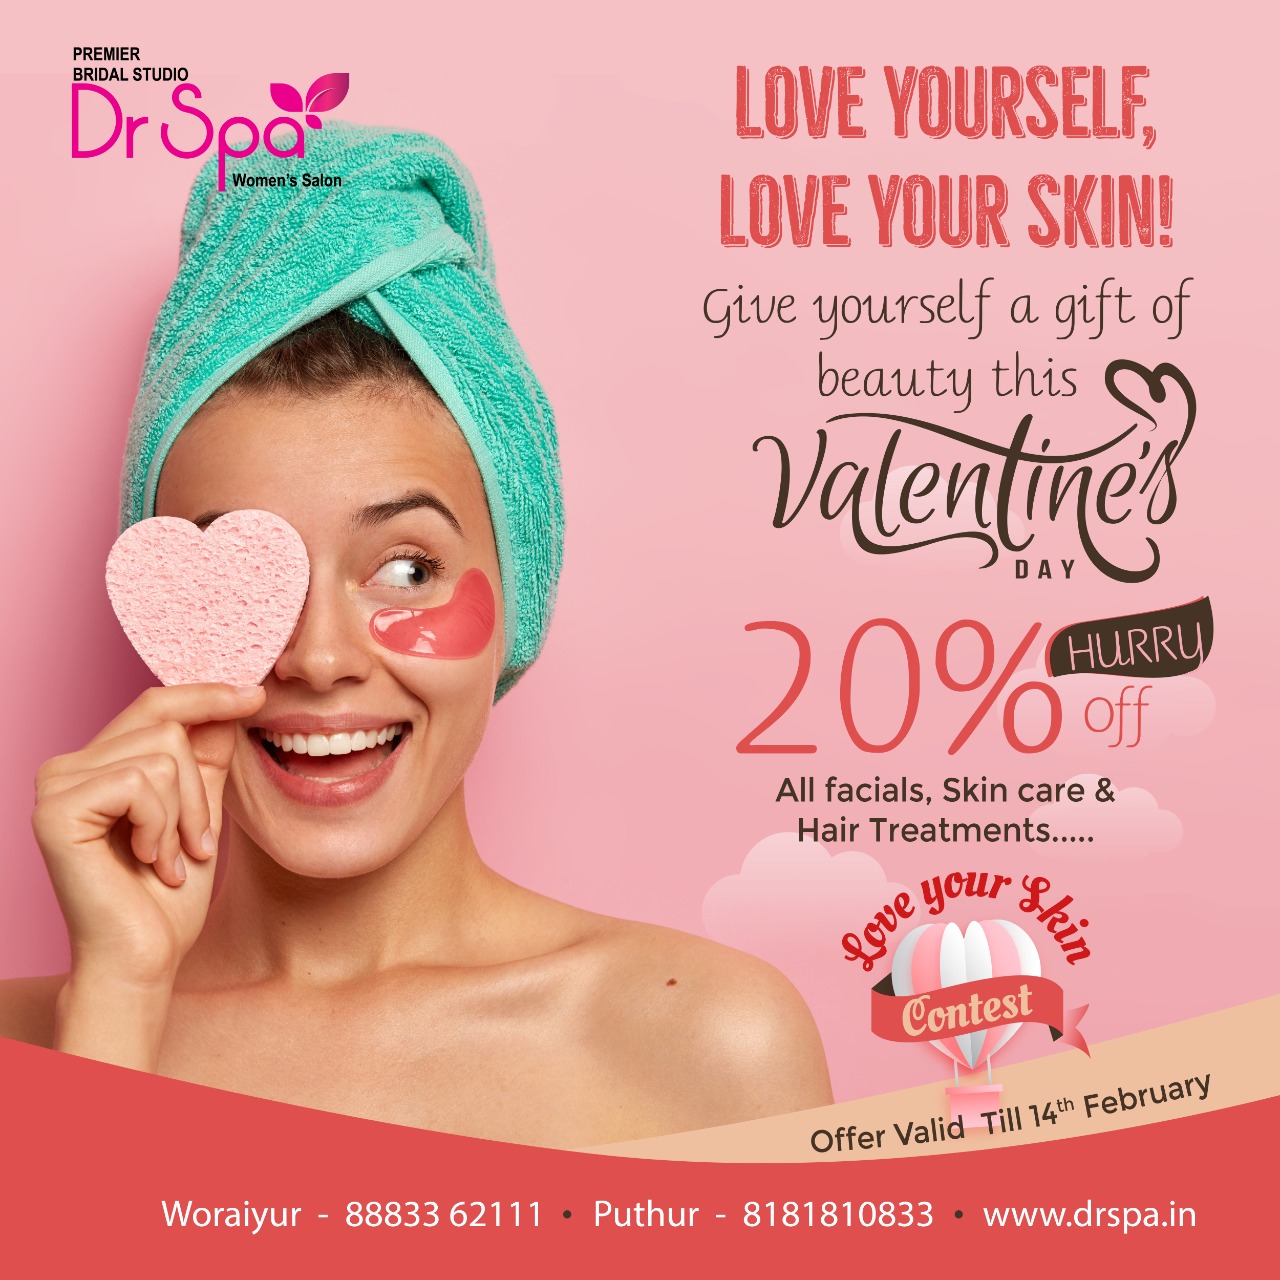 Love Your Skin Contest